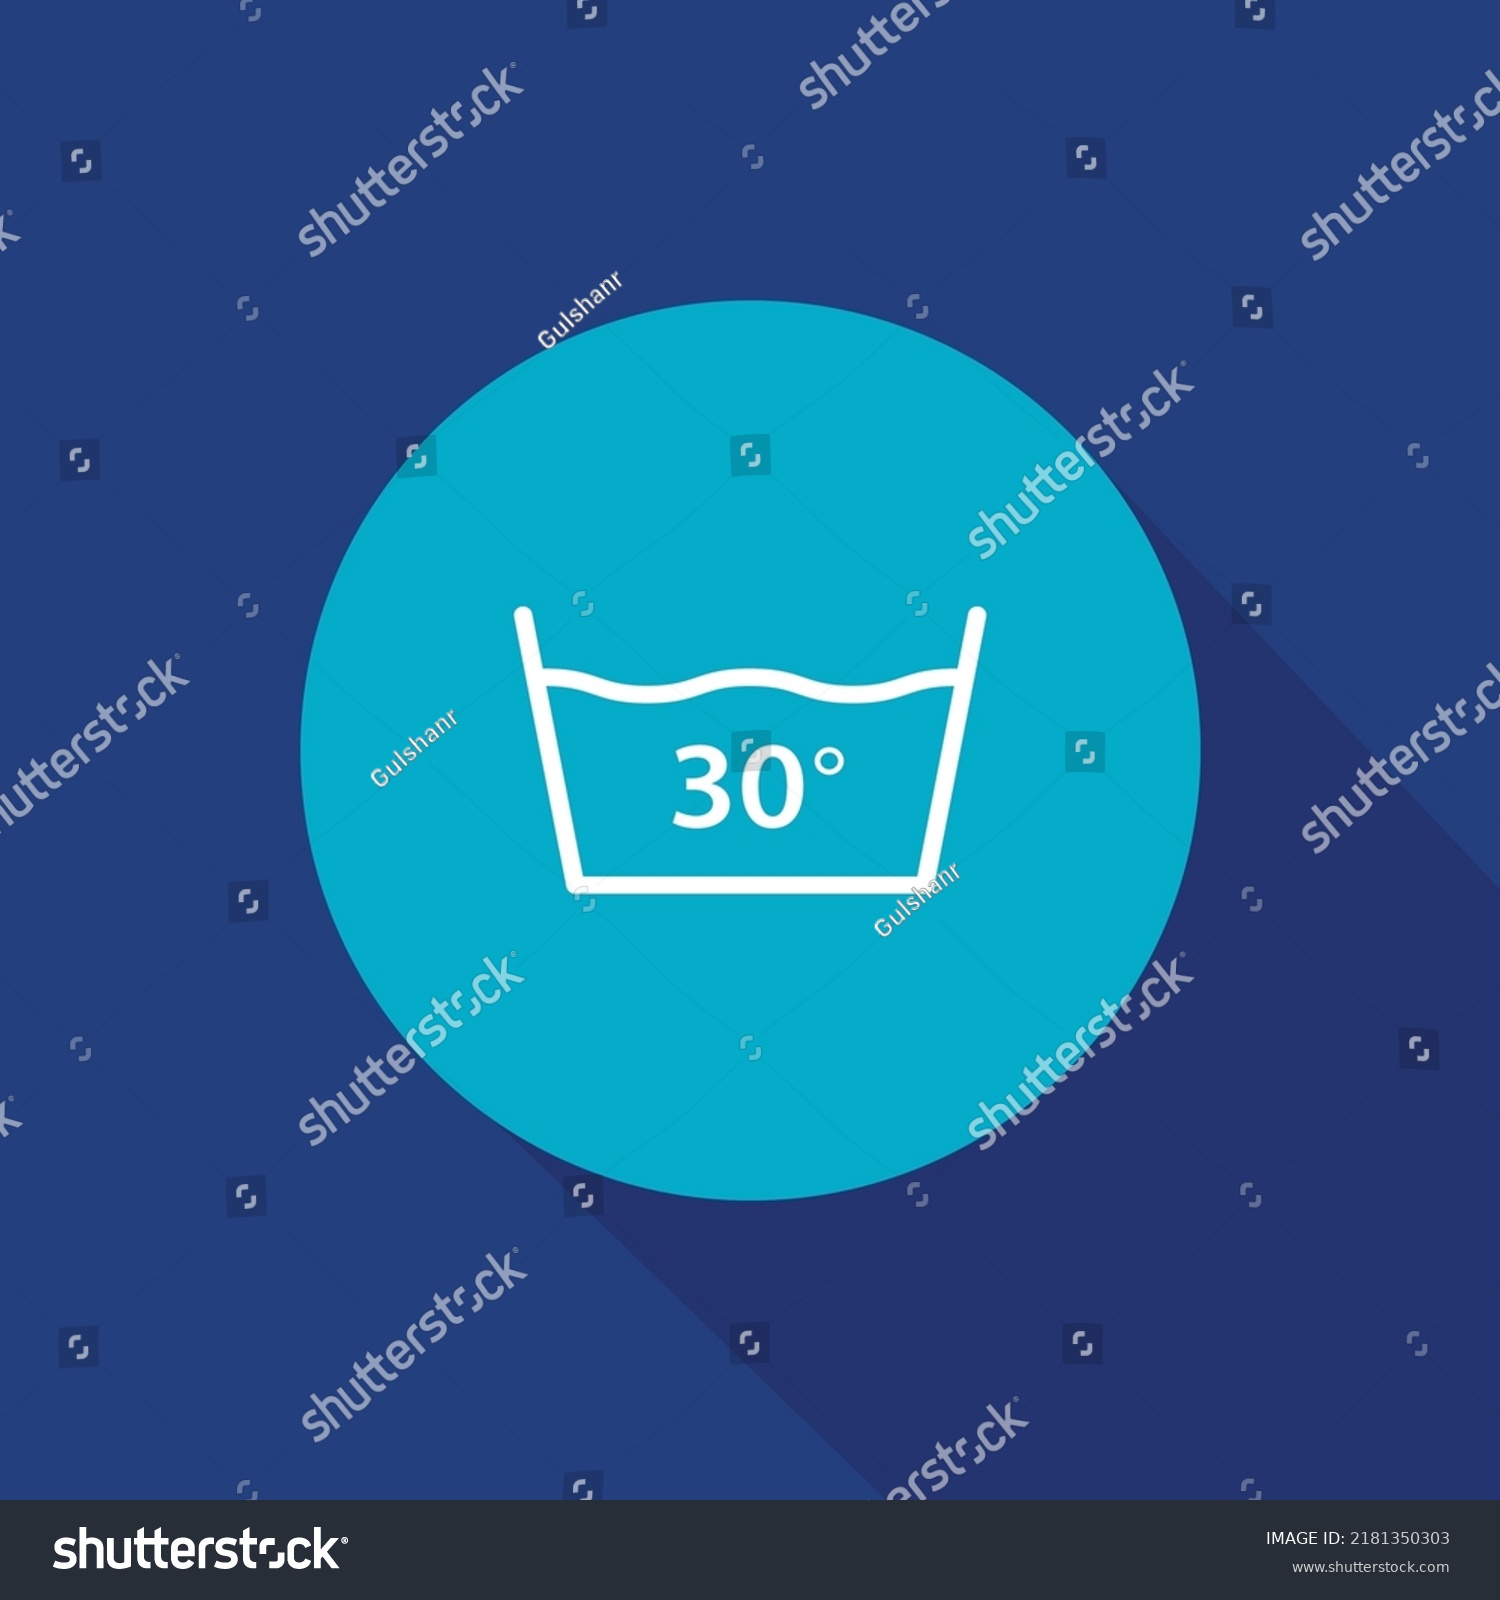 SVG of delicate gentle 30 degrees washing laundry symbol line icon.clean, room, domestic, housework, white, wash,machine, clothing,dirty, washer,washing isolated symbol for web and mobile app svg